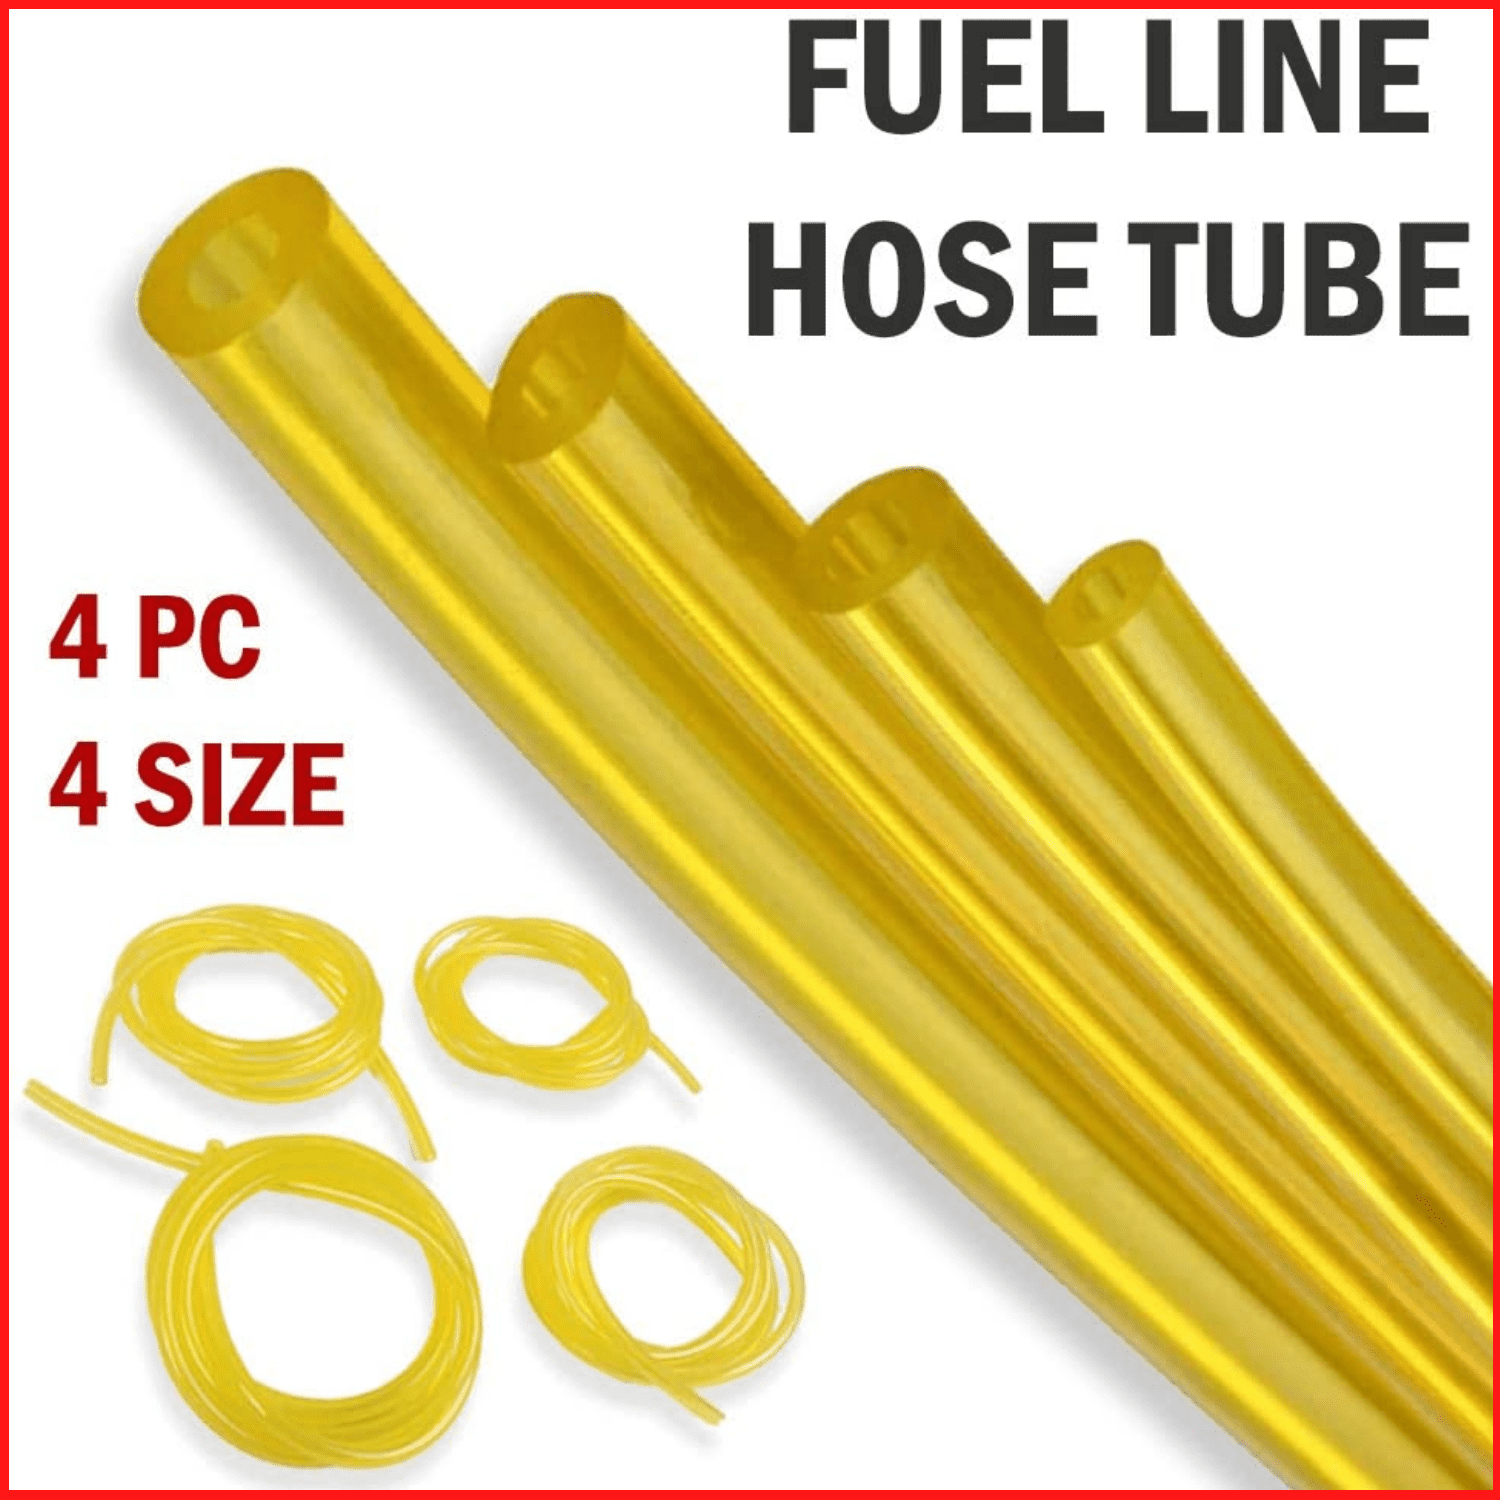 4x Fuel Line Hose Gas Pipe Tubing For Trimmer Chainsaw Leaf Blower Replace Parts 